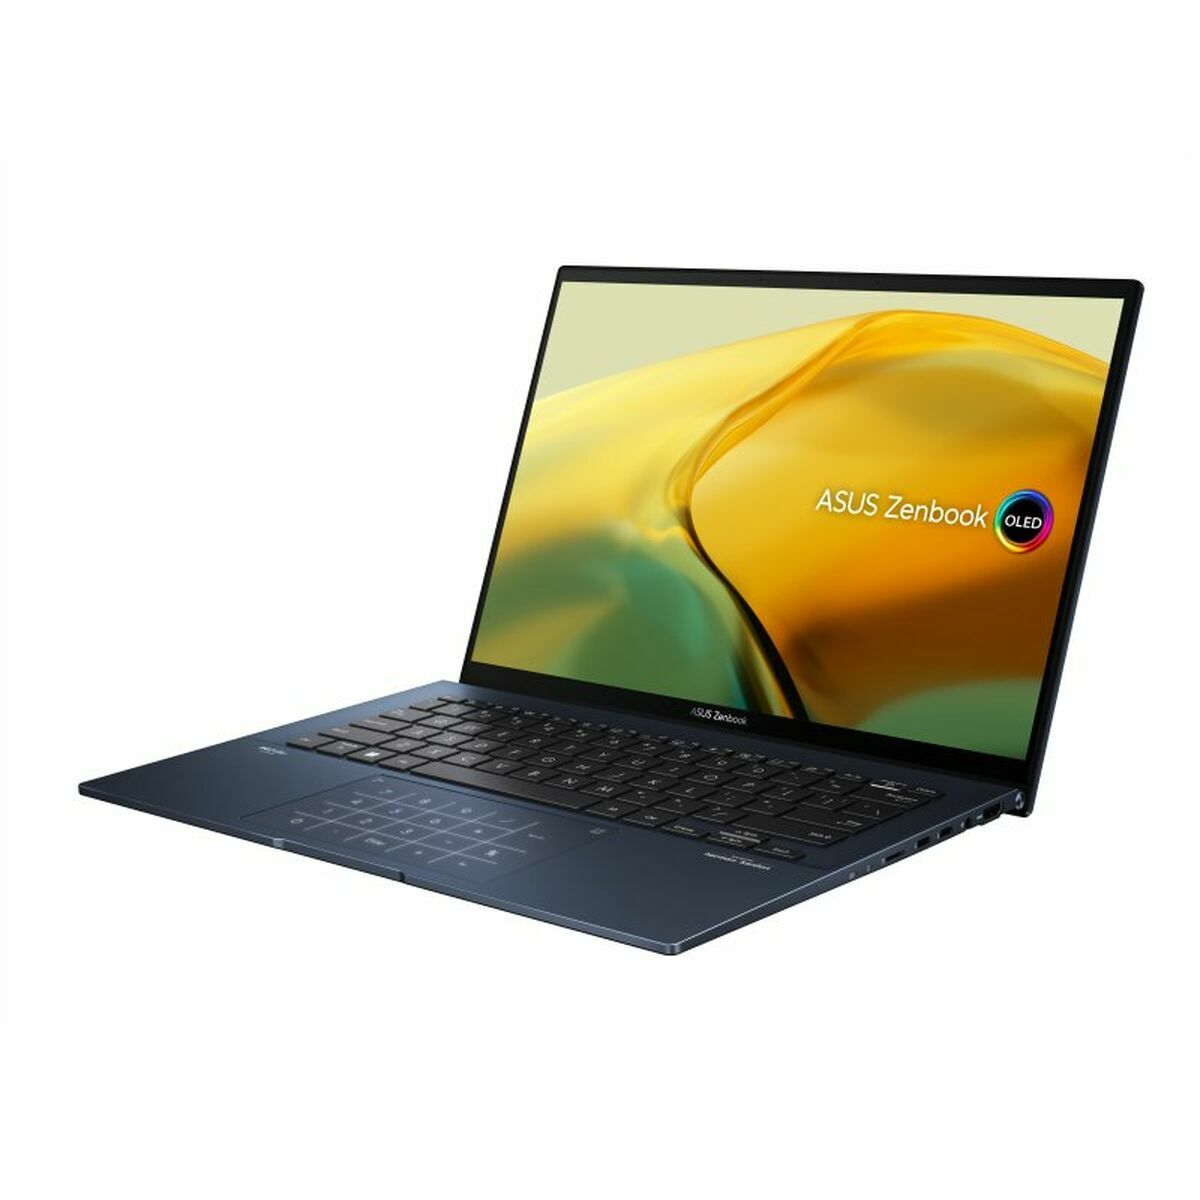 Laptop Asus UX3402ZA-KM020W 14" Intel Core i5-1240P 16 GB RAM 512 GB SSD, Asus, Computing, notebook-asus-ux3402za-km020w-intel-core-i5-1240p-512-gb-ssd-16-gb-ram, :2-in-1, :512 GB, :Intel-i5, :QWERTY, :RAM 16 GB, :Touchscreen, Brand_Asus, category-reference-2609, category-reference-2791, category-reference-2797, category-reference-t-19685, Condition_NEW, office, Price_+ 1000, Teleworking, RiotNook